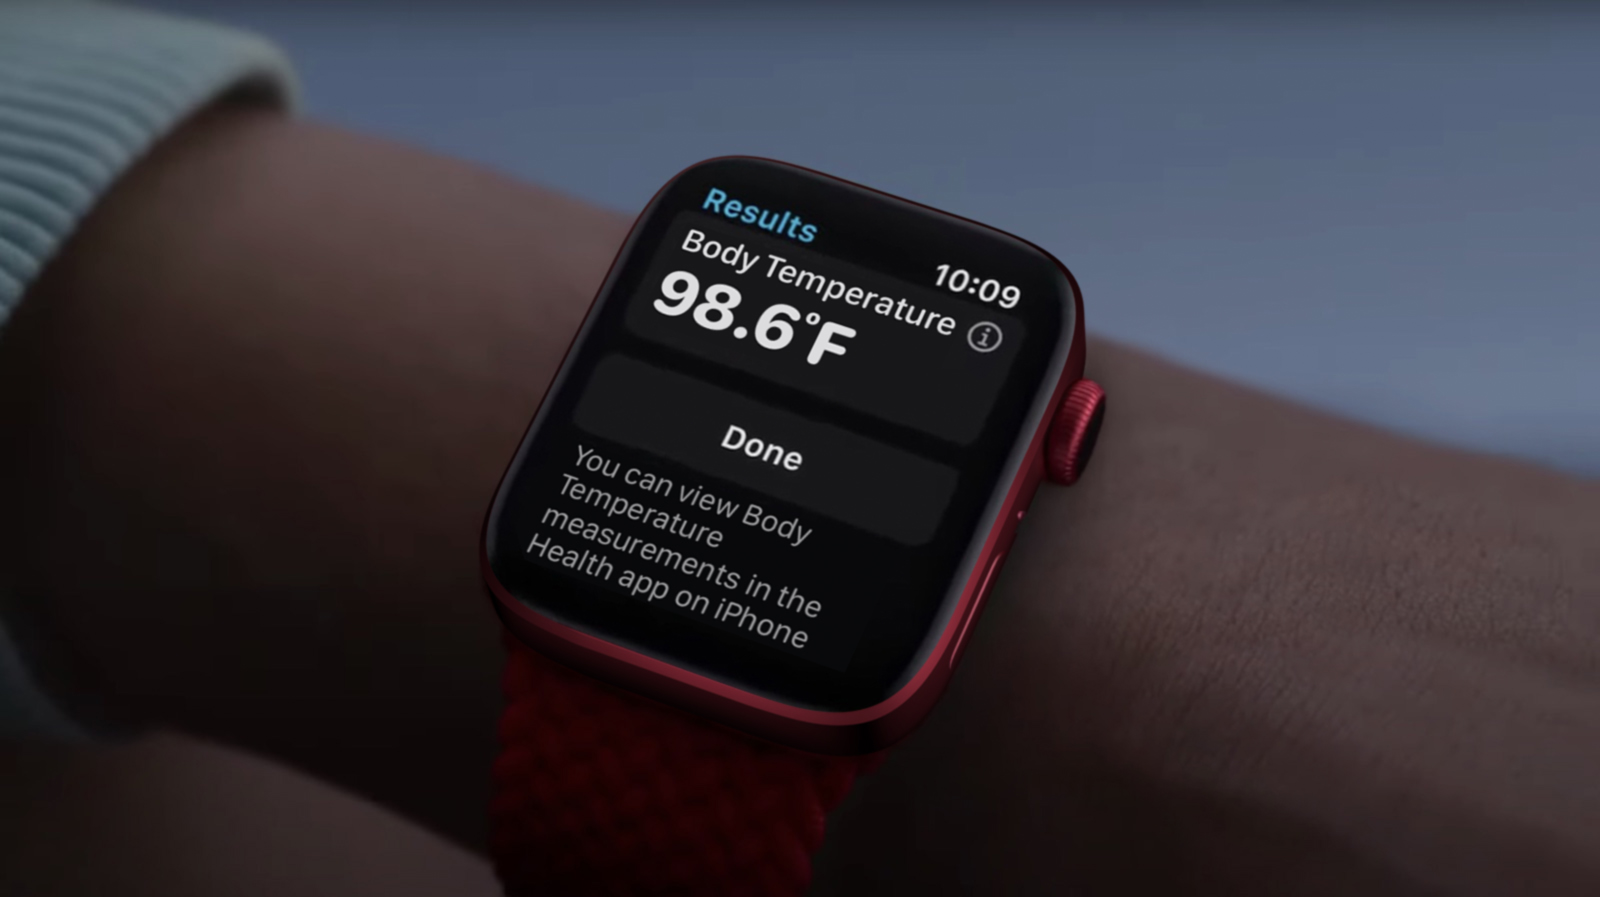 Kuo: Apple Watch Series 7 Missed Body Temperature Monitoring Due to Algorithm Problems, but Feature Could Still Come to Series 8